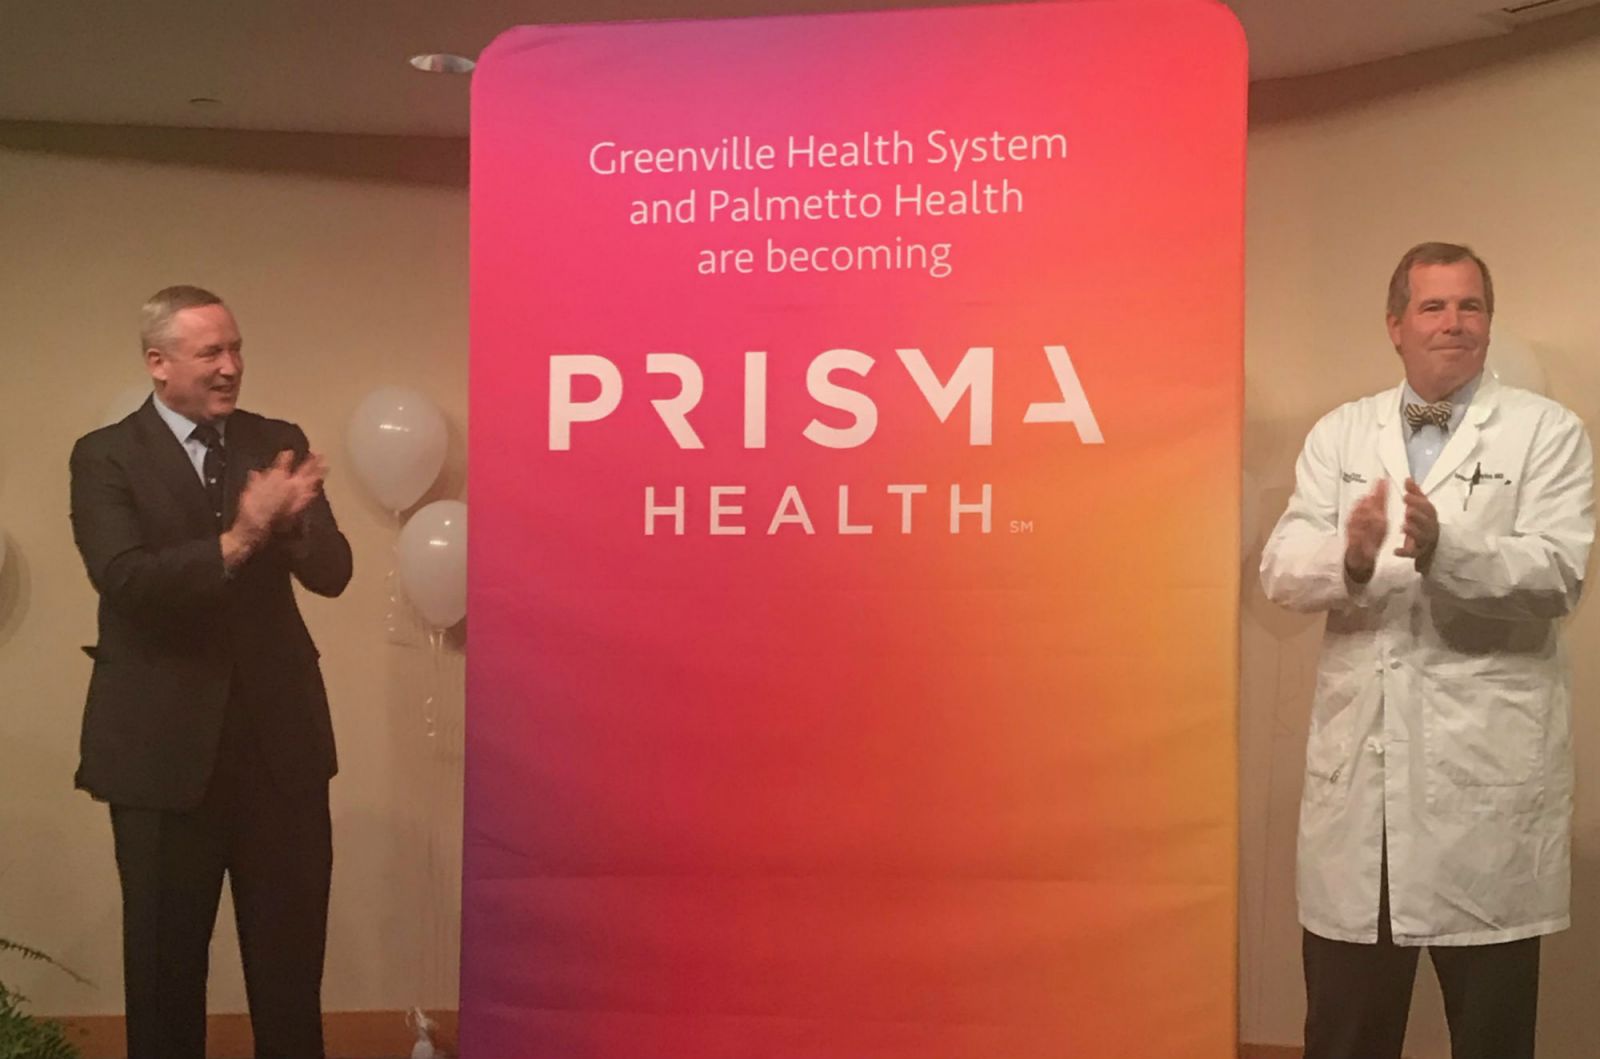 Prisma Health co-CEO Michael Riordan, left, and Dr. Spence Taylor, president of the Upstate affiliate of Prisma Health, unveil the company's new logo. (Photo/Teresa Cutlip)